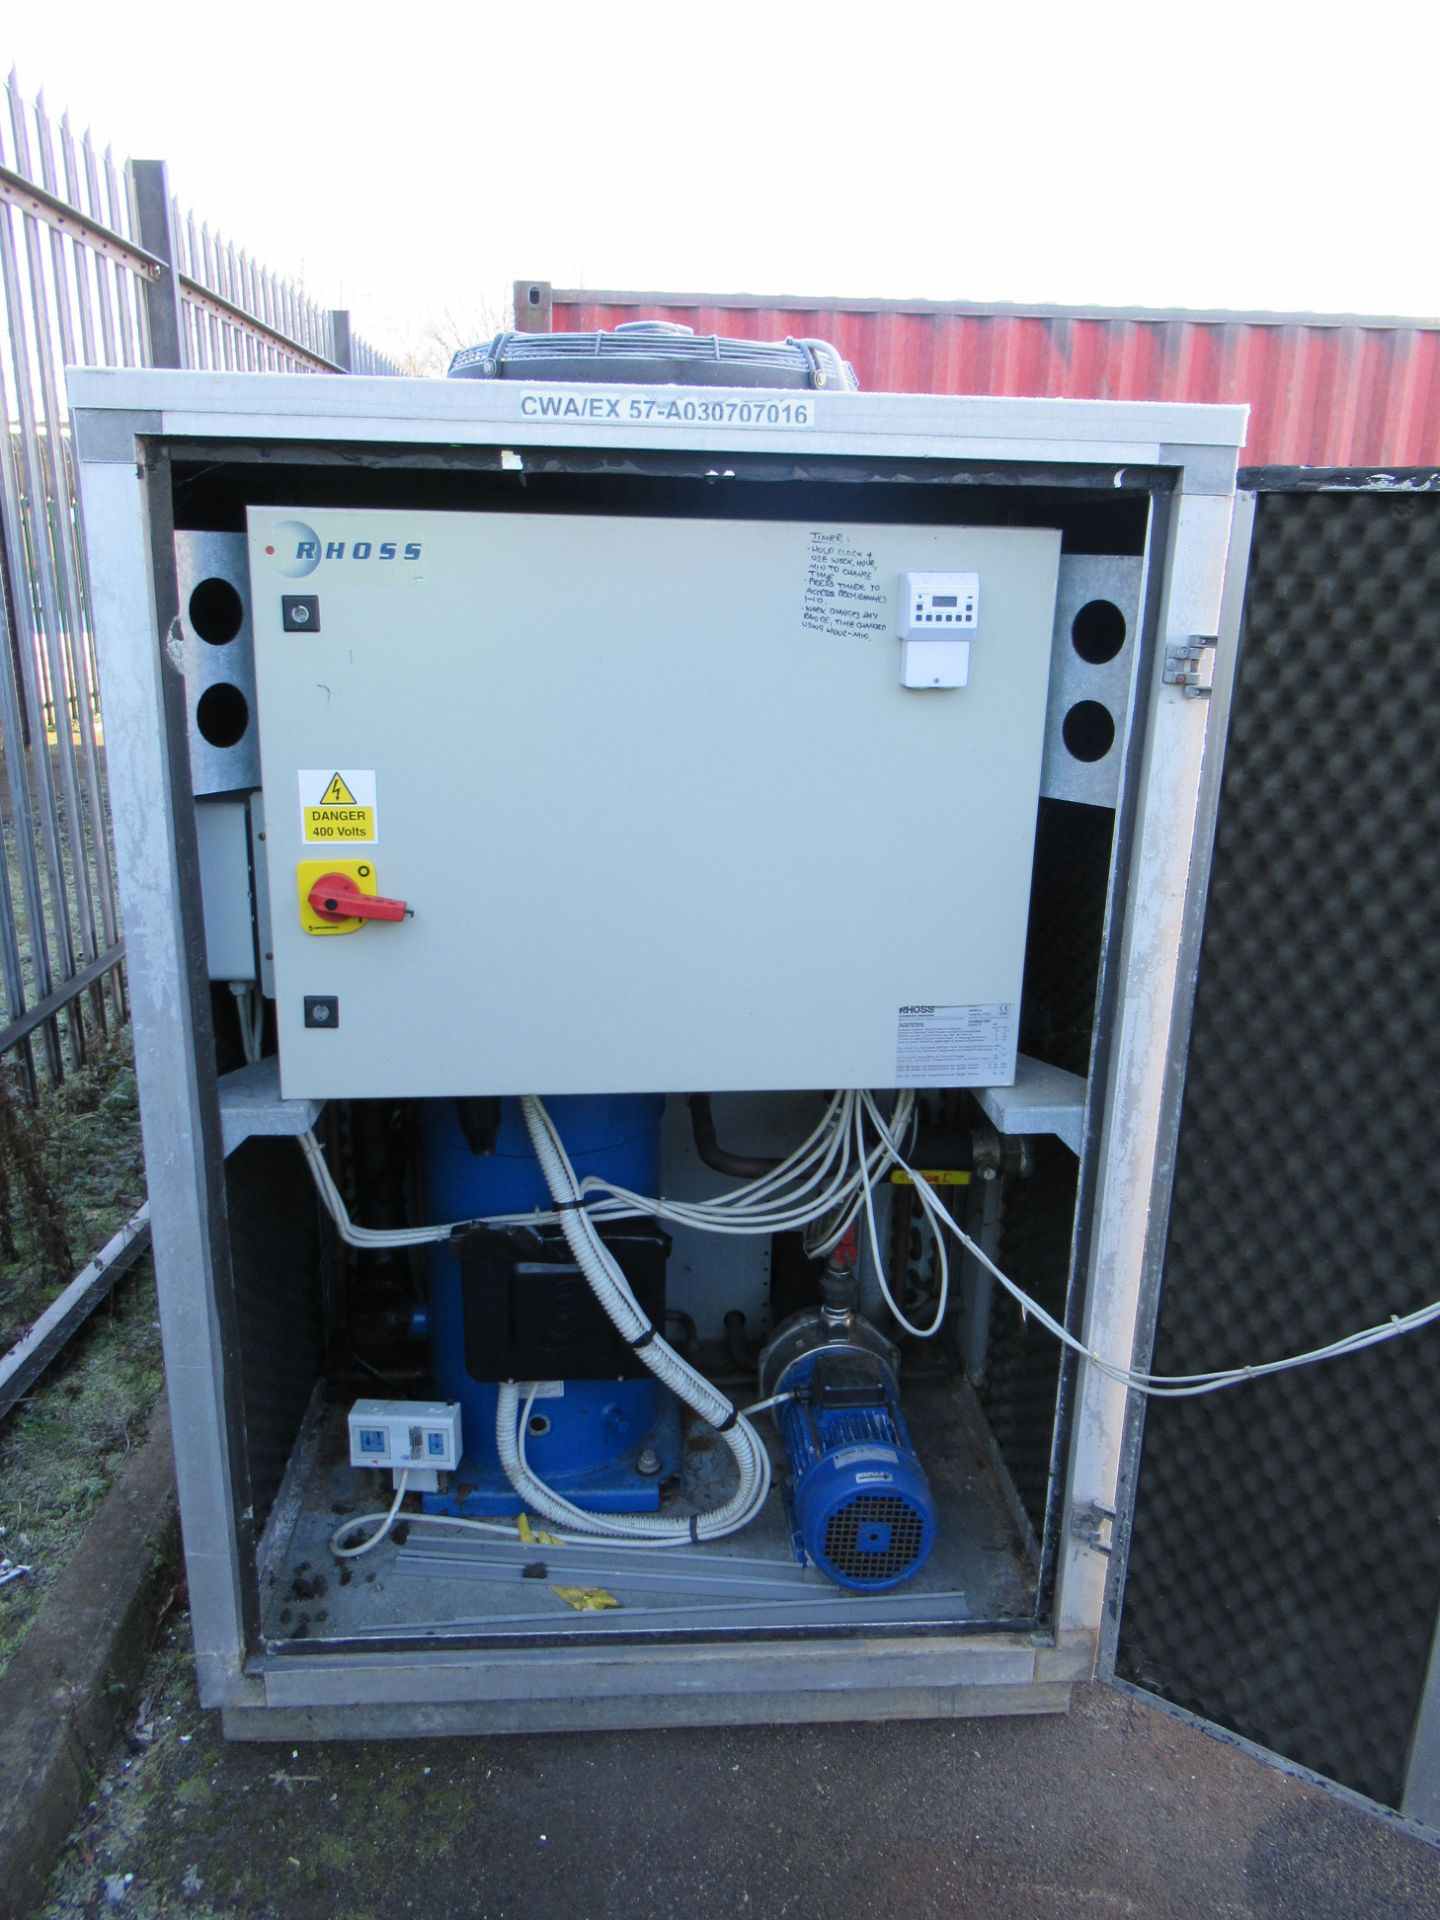 Rhoss industrial water chiller, model number CWA/EX57,66 kW cooling capacity - Image 12 of 14